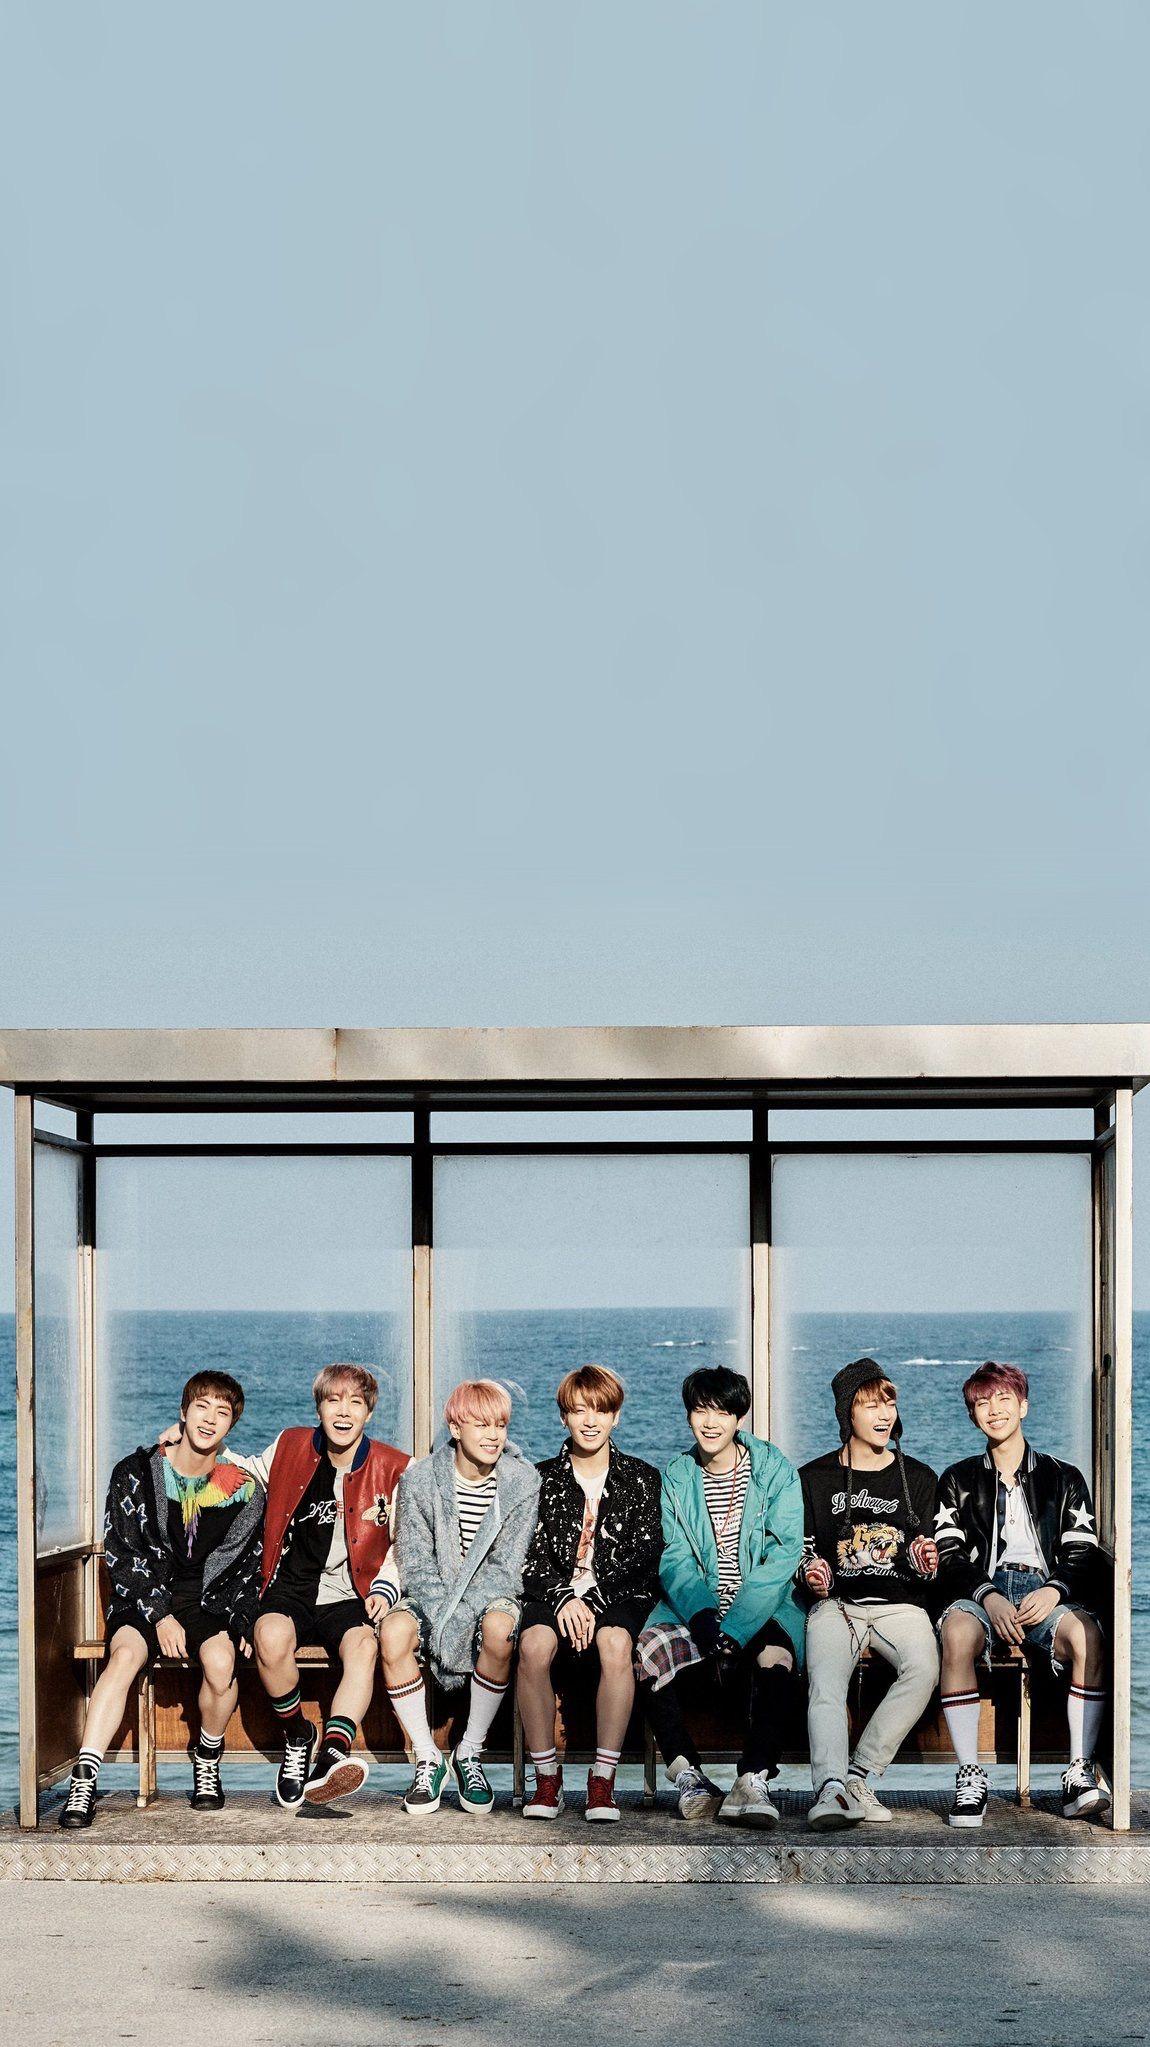 Bts Iphone Wallpapers Top Free Bts Iphone Backgrounds Wallpaperaccess